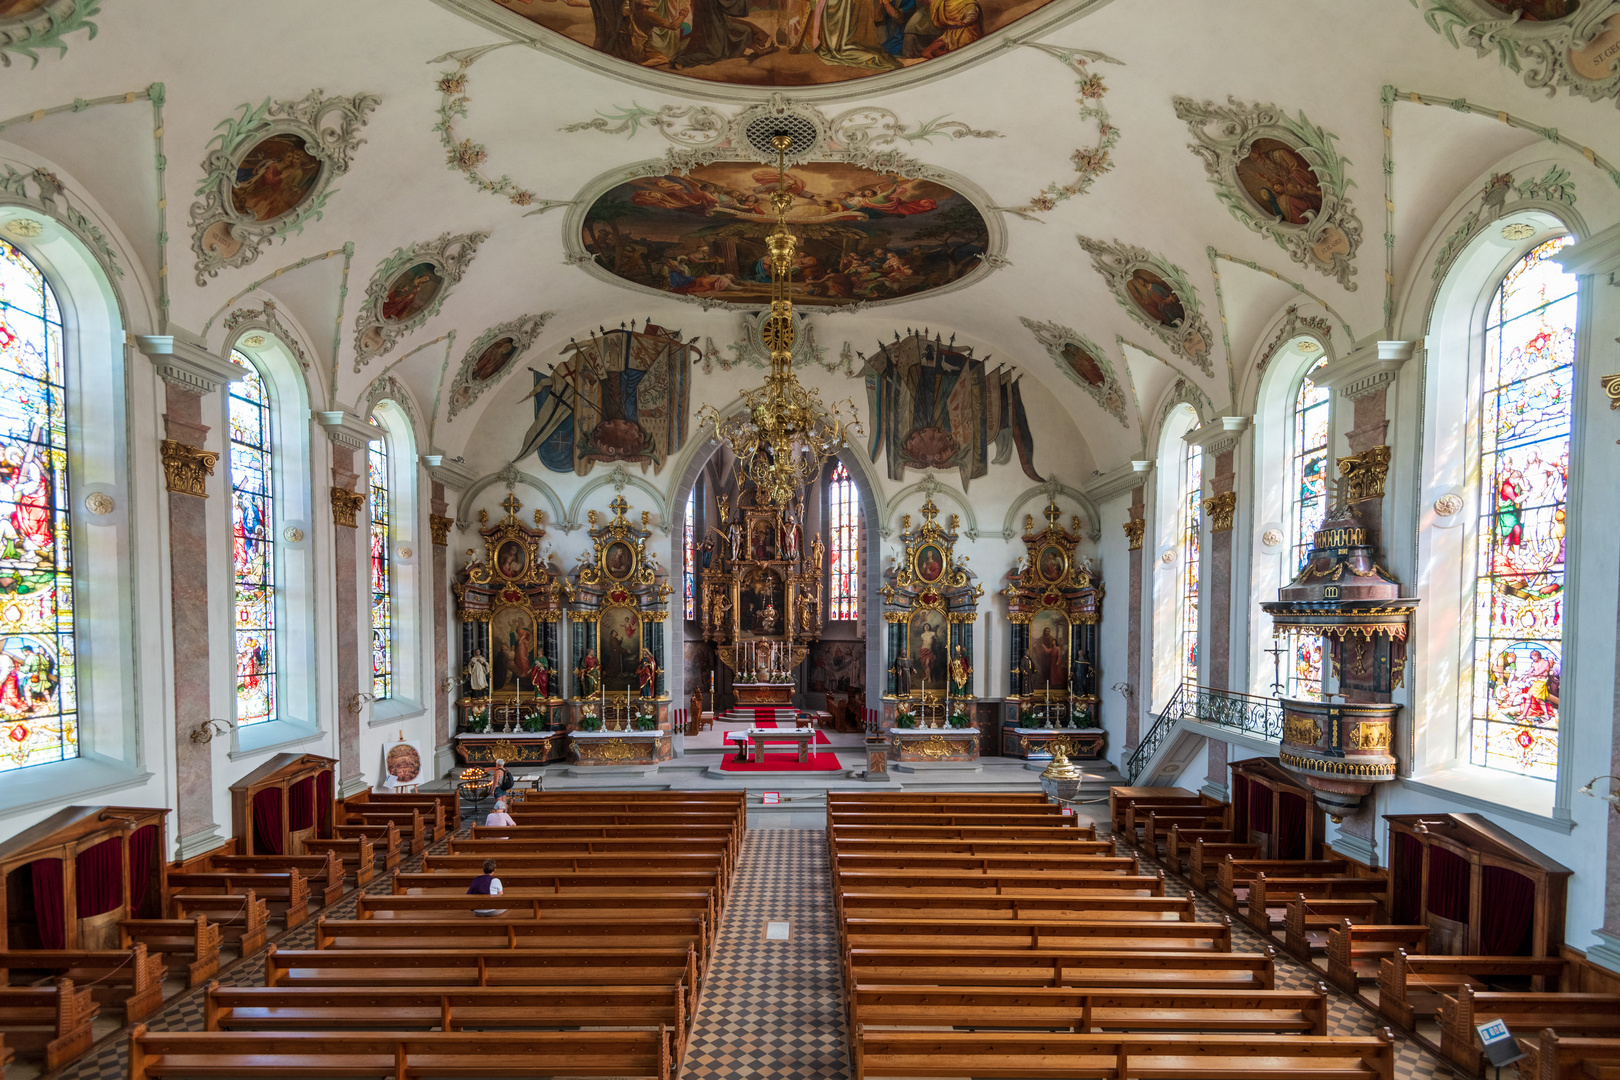 St. Mauritius in Appenzell